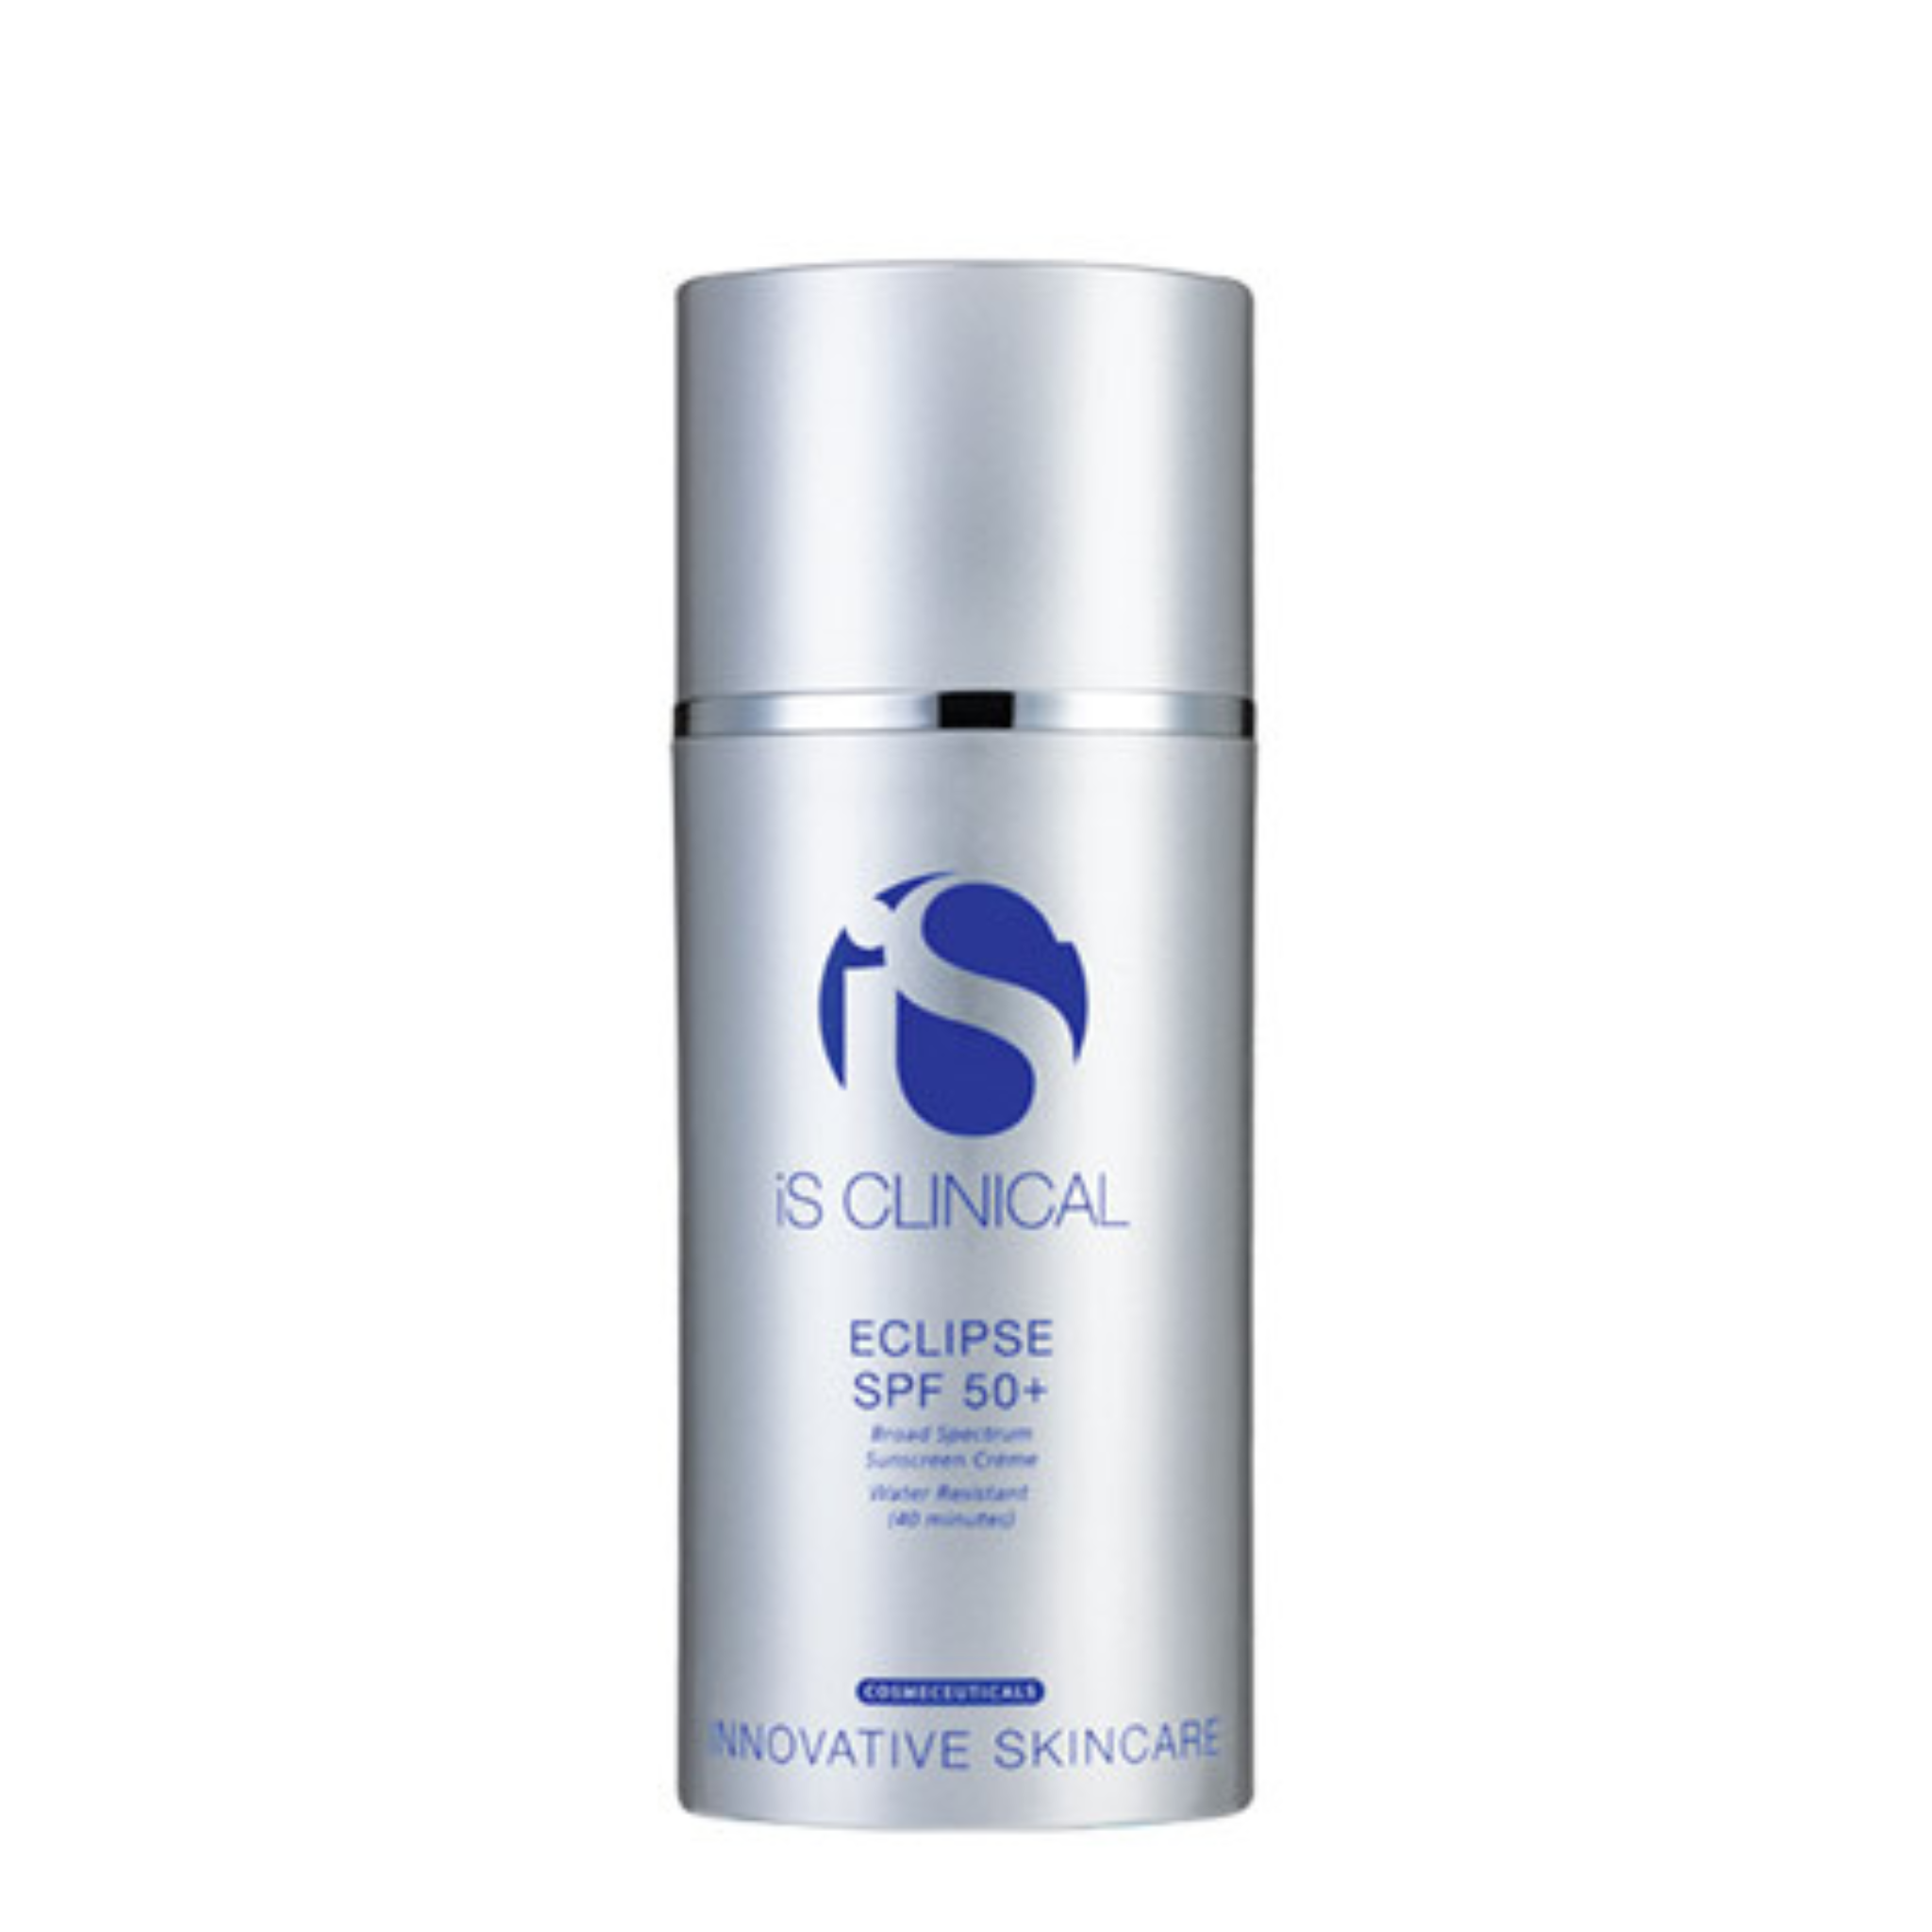 is Clinical - Eclipse SPF 50+